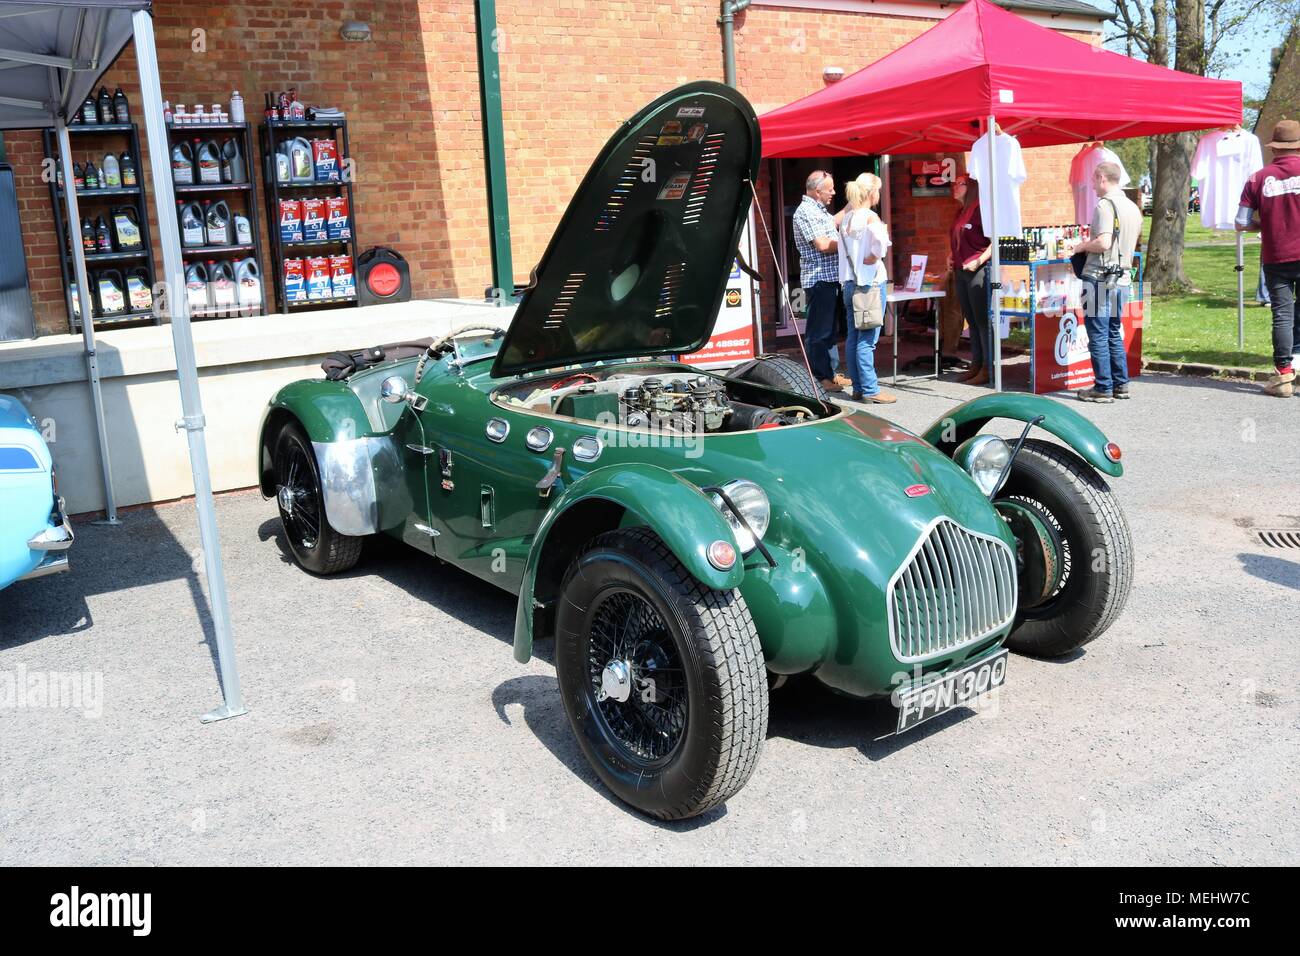 Bicester, Oxfordshire, UK.  22.04.2018.  Sunday Scramble 'Drive It Day' at Bicester Heritage which is a historical ex RAF base displaying classic vehicles which included cars, trucks, motorbikes, bikes, aeroplanes and fire engines.  Credit:  Michelle Bridges/Alamy Live News. Stock Photo